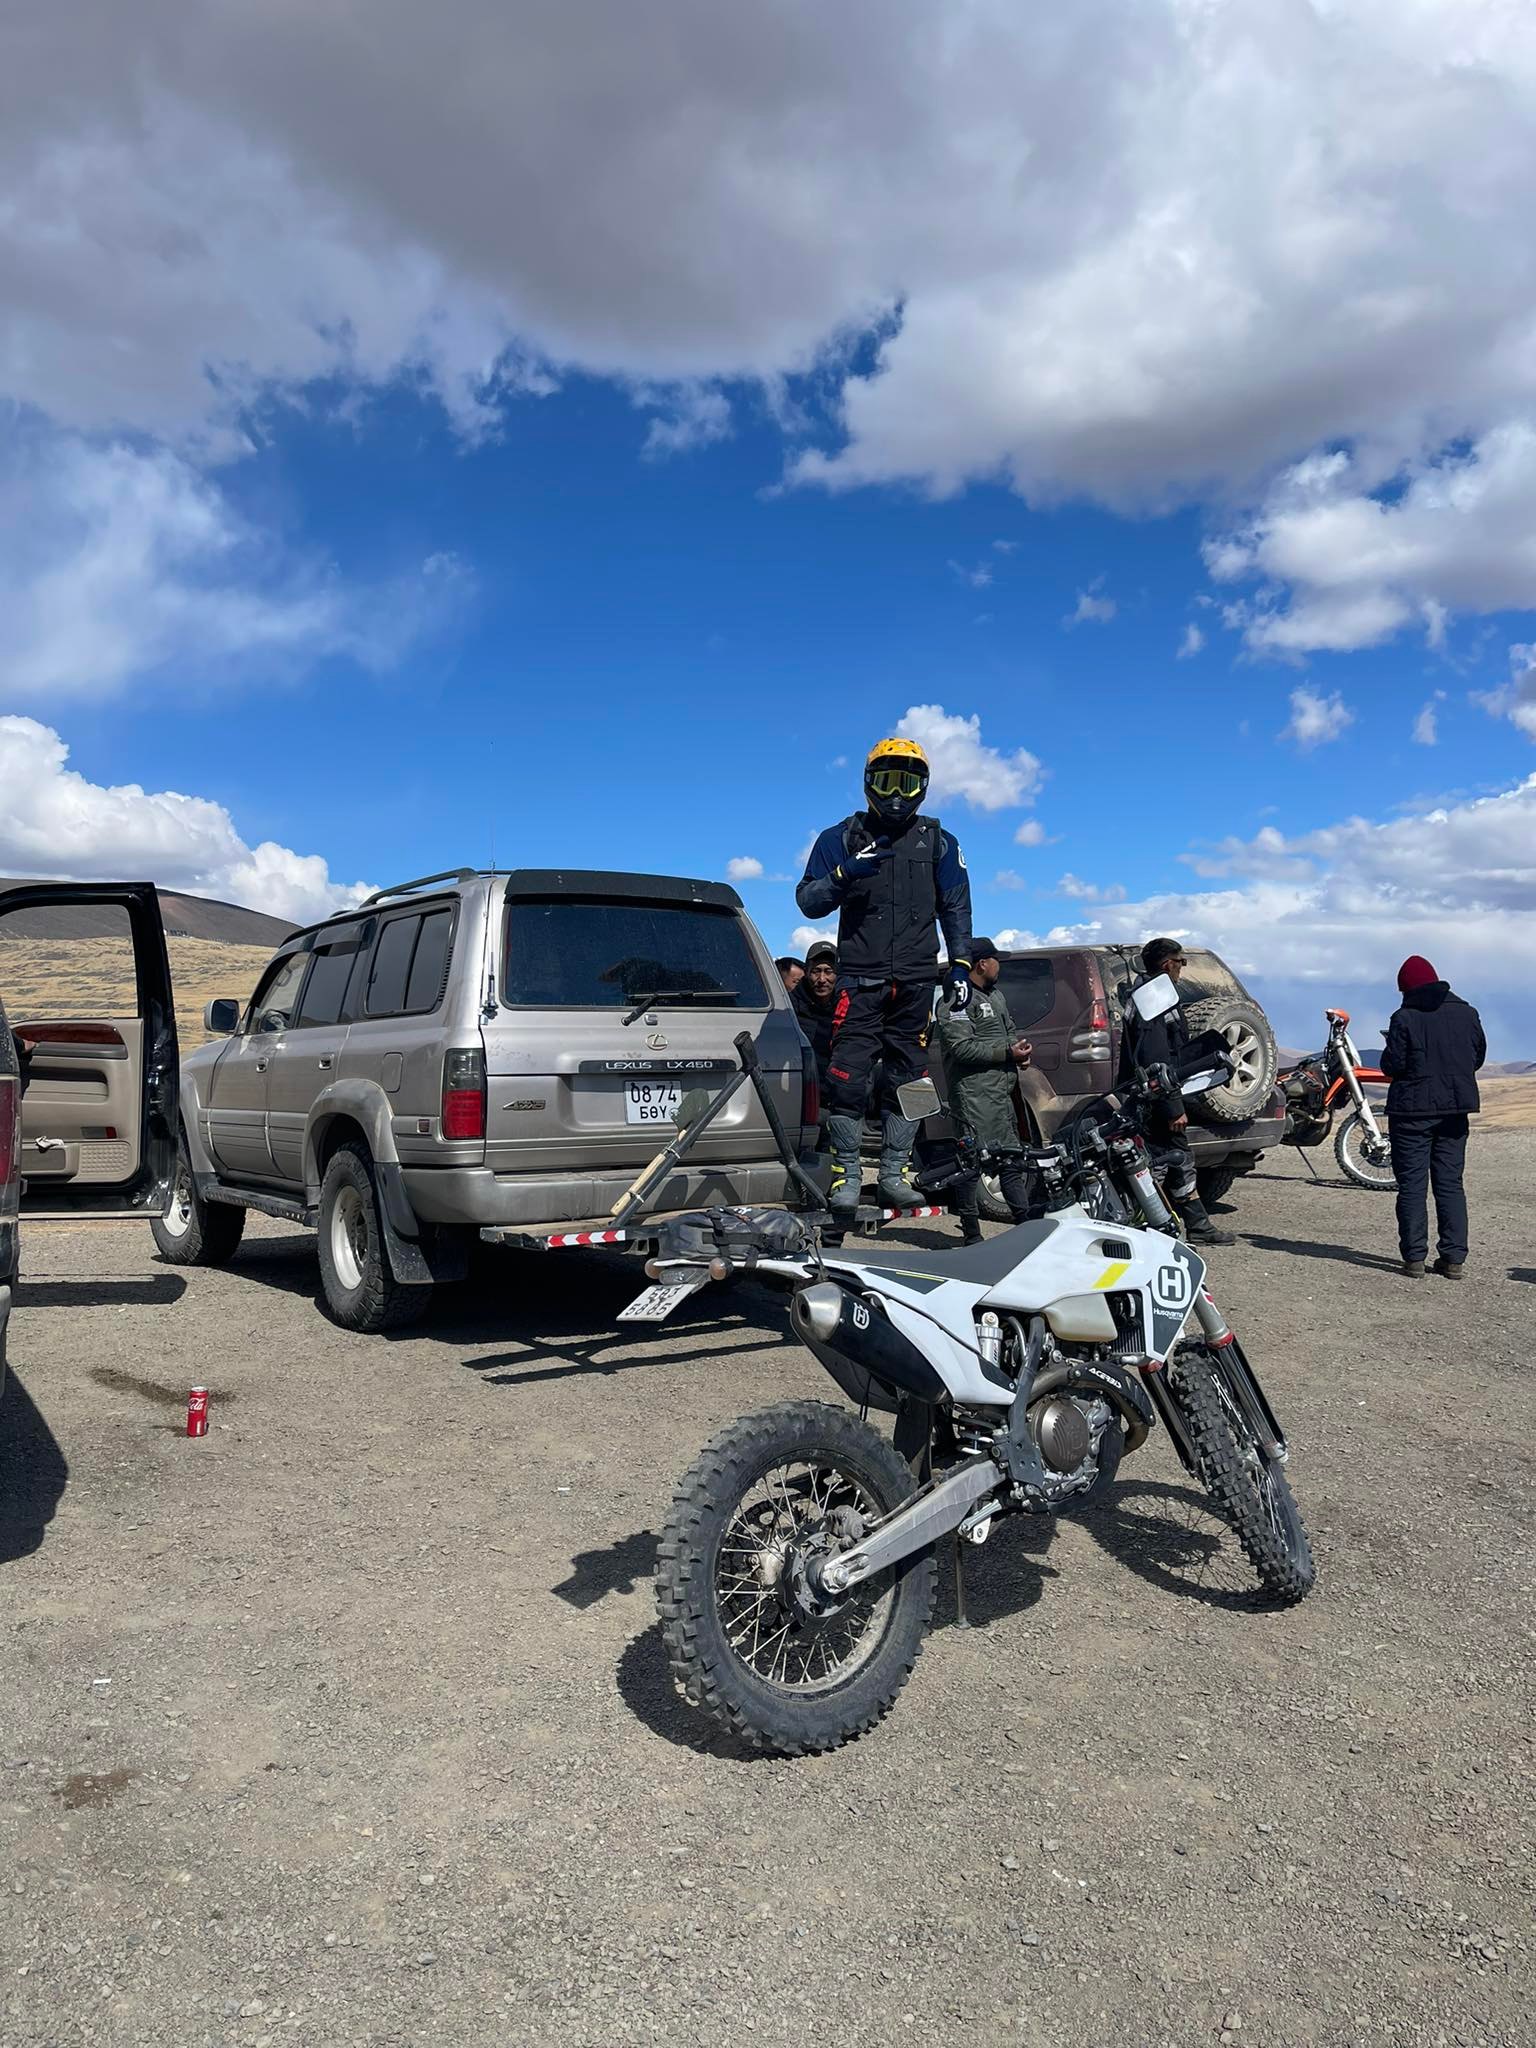 Motorcycling tour in Altai